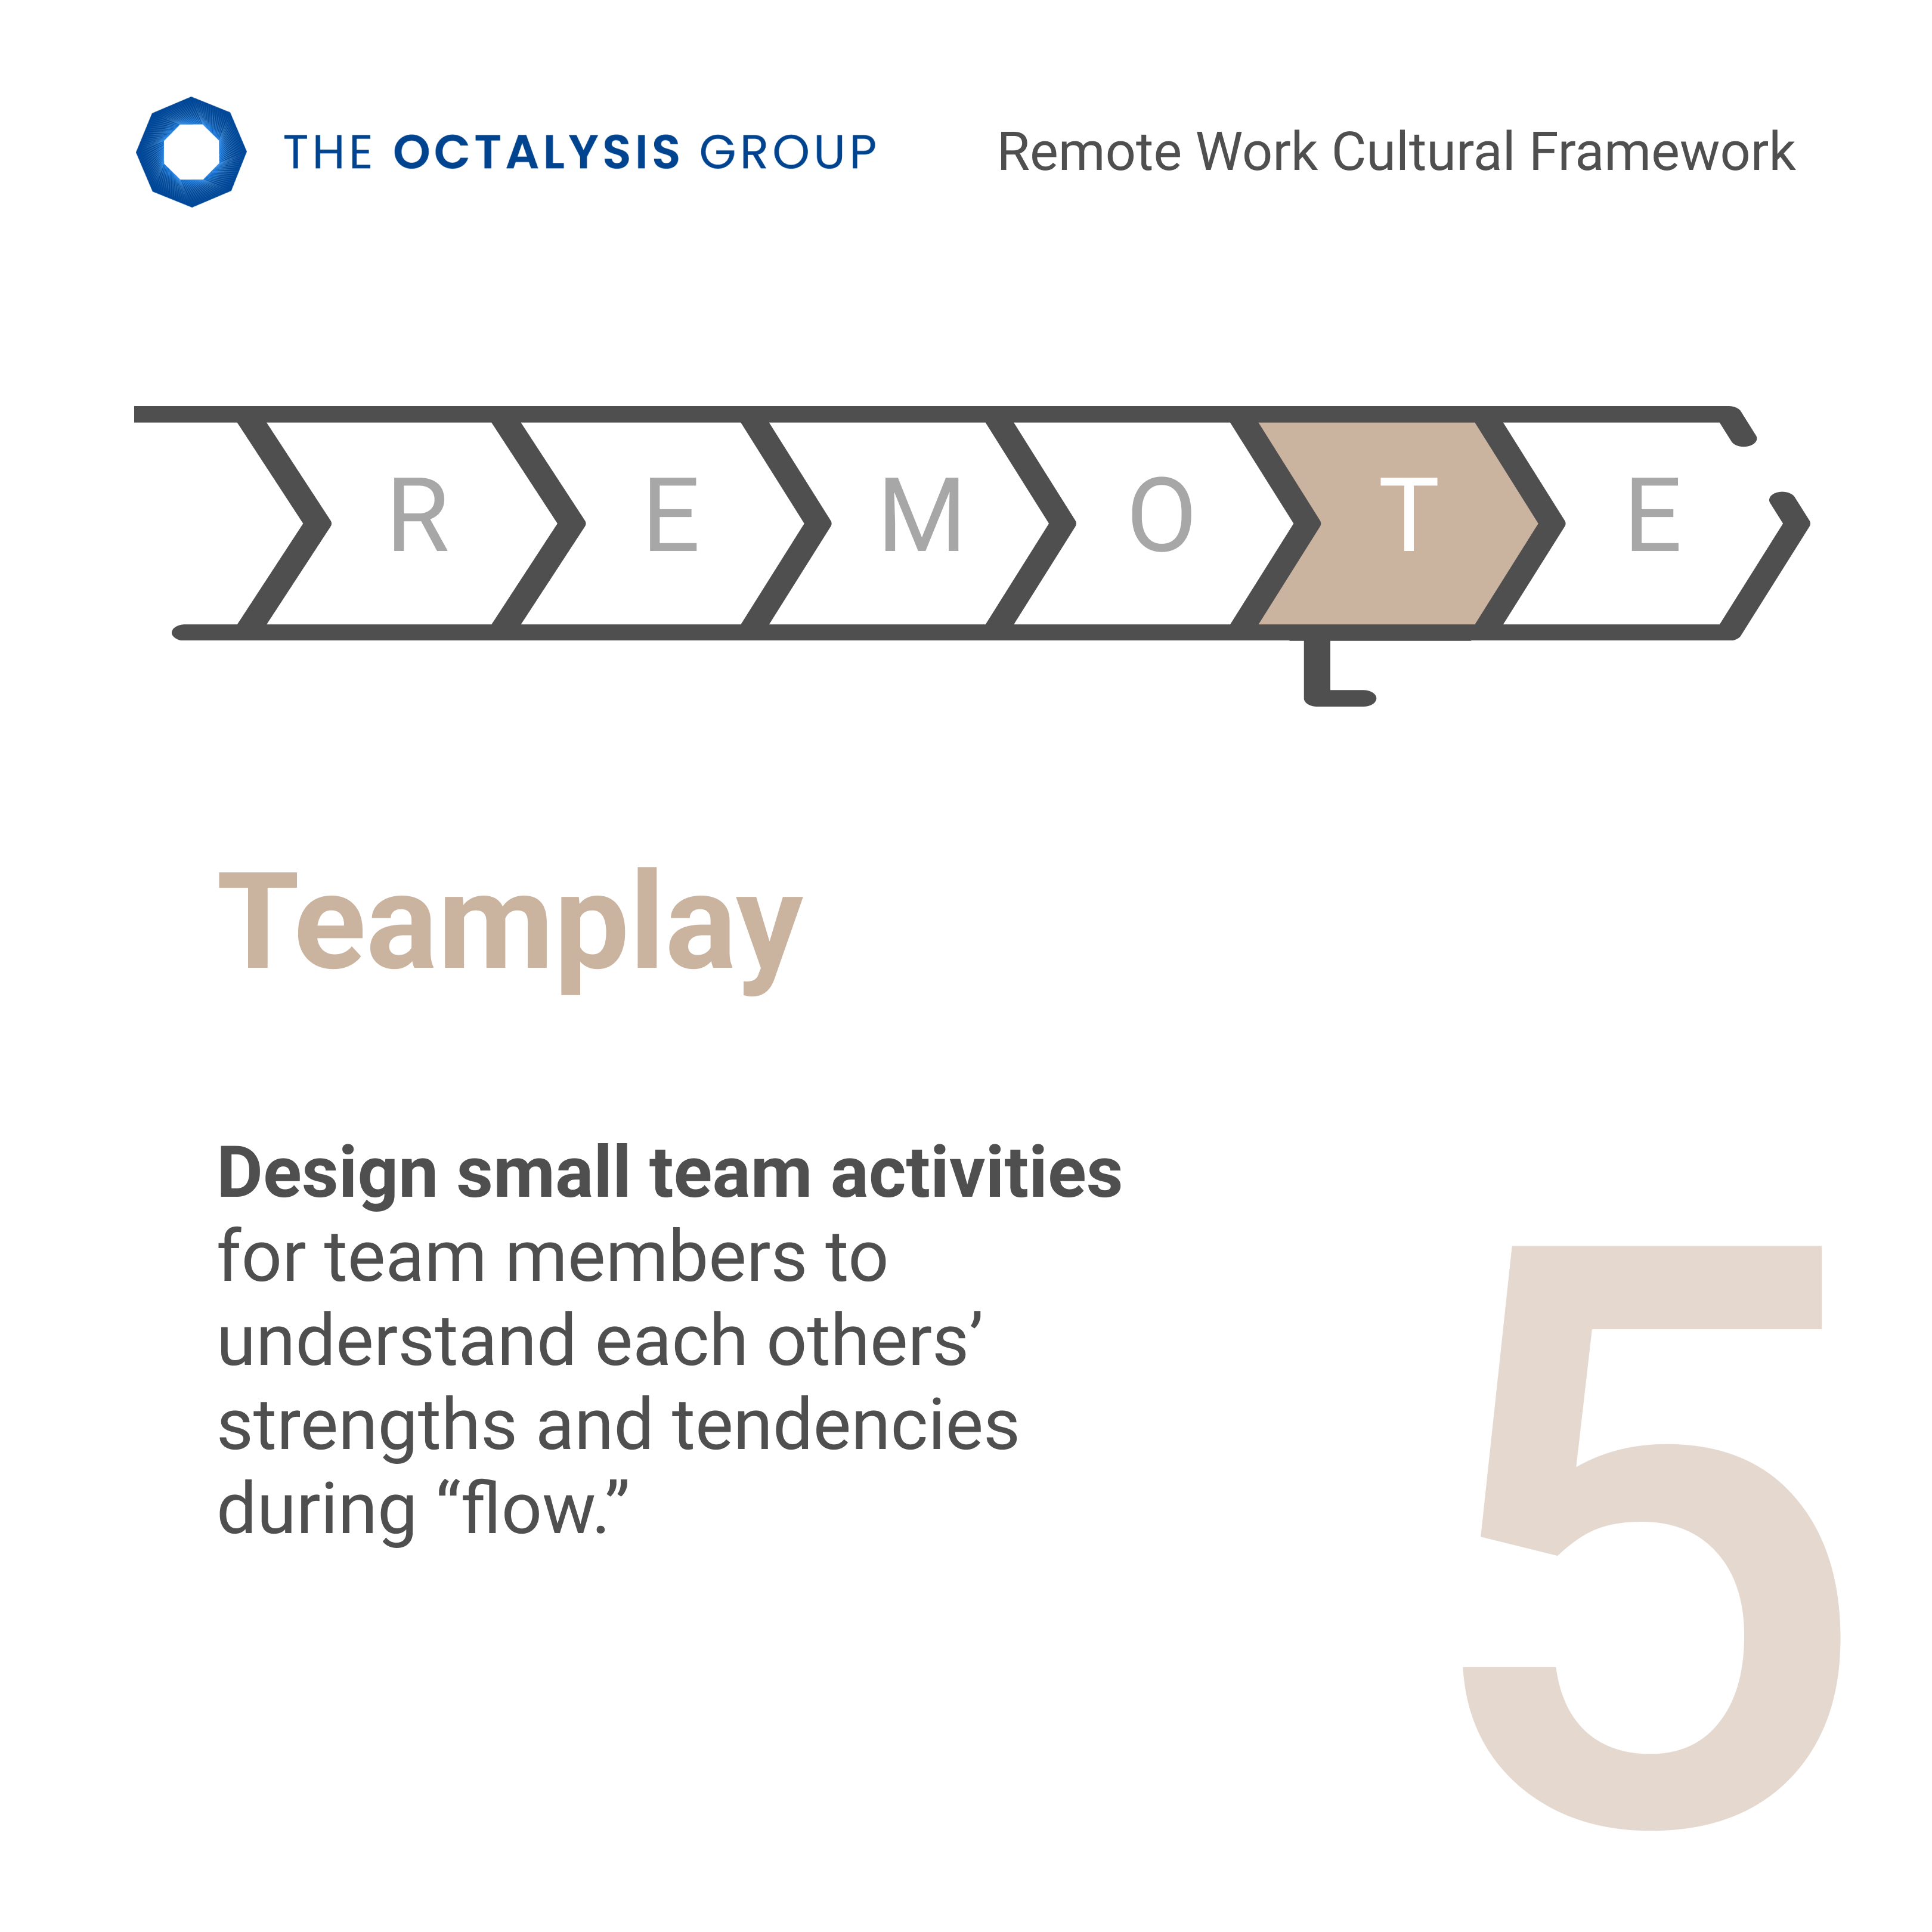 The Ultimate Guide to REMOTE Work Series: TEAMPLAY